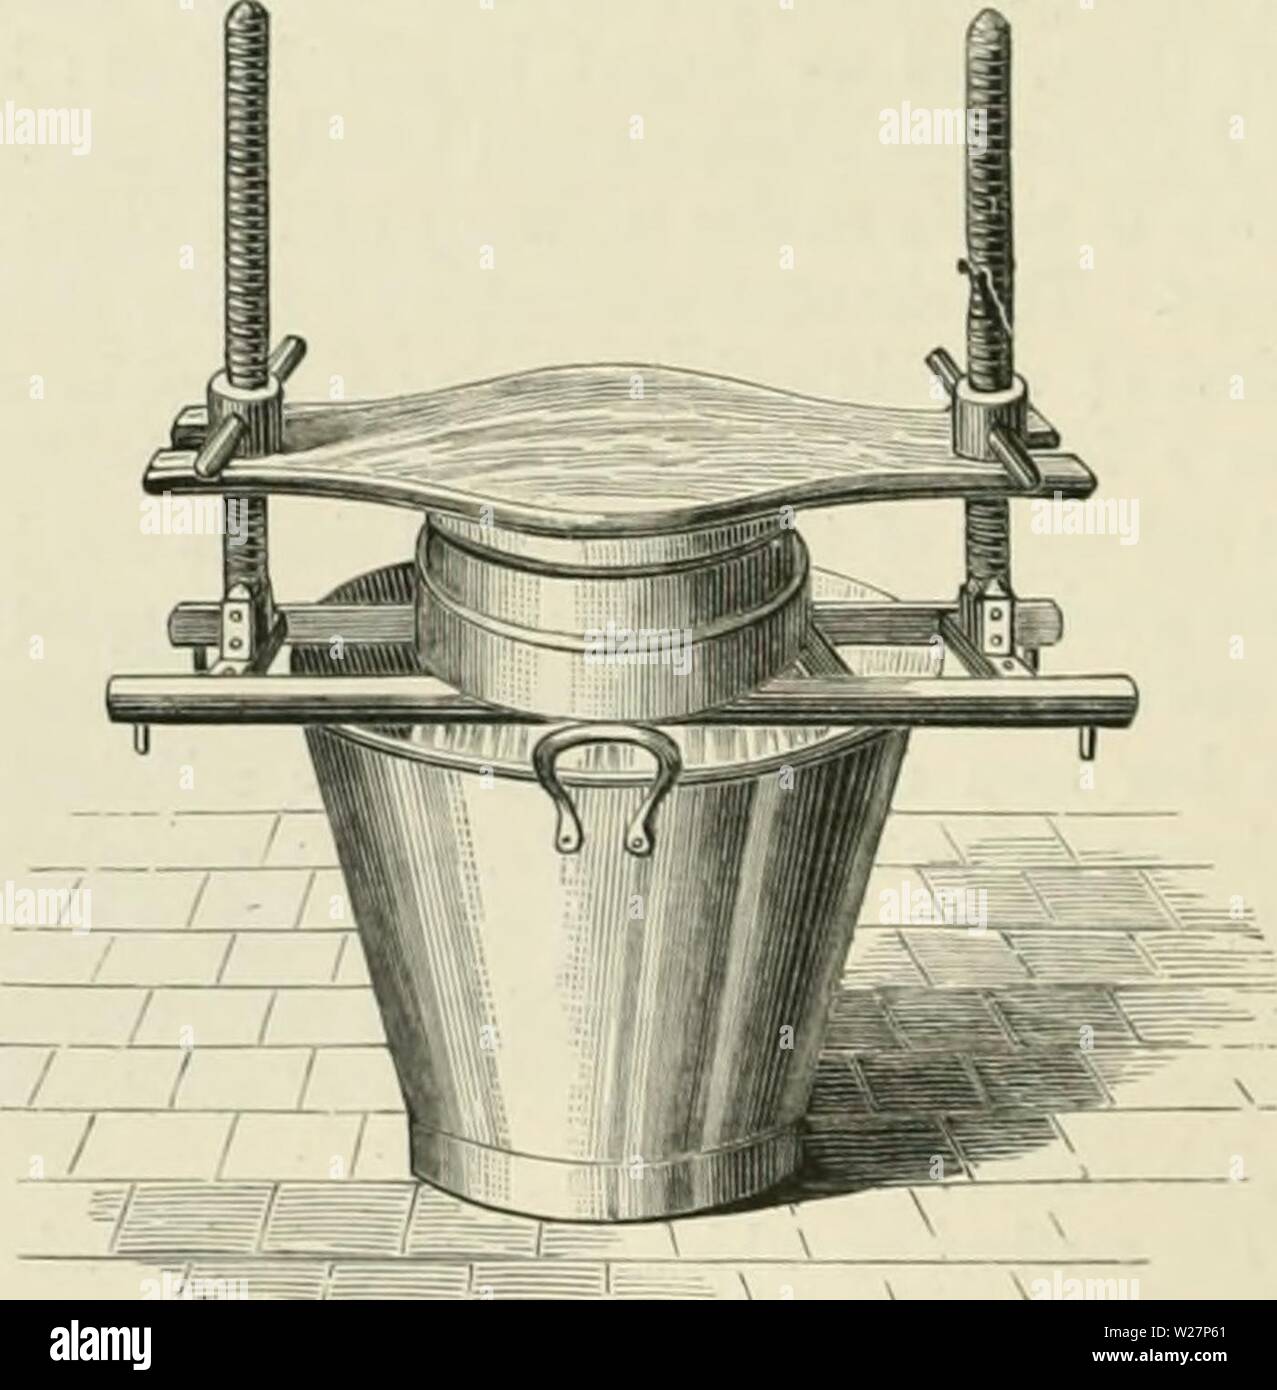 Archive image from page 303 of Dairy farming  being the. Dairy farming : being the theory, practice, and methods of dairying  dairyfarmingbein00shel Year: 1880  Fig. 115.—TUJS PoLE-PKESS. a weight, or the dairymaid balancing herself, on the top of the cheese-kettle. Later on, two upright wooden screws were attached to the ladder, far enough apart to admit of the cheese-vat resting there, and between them a piece of wood which passed over the curd in the vat. This implement (Fig. 11 (J) was called a ' screw-press;' it was found    Fig. IIG.—The Sckew-pbess. to be an exceedingly useful tool, and Stock Photo